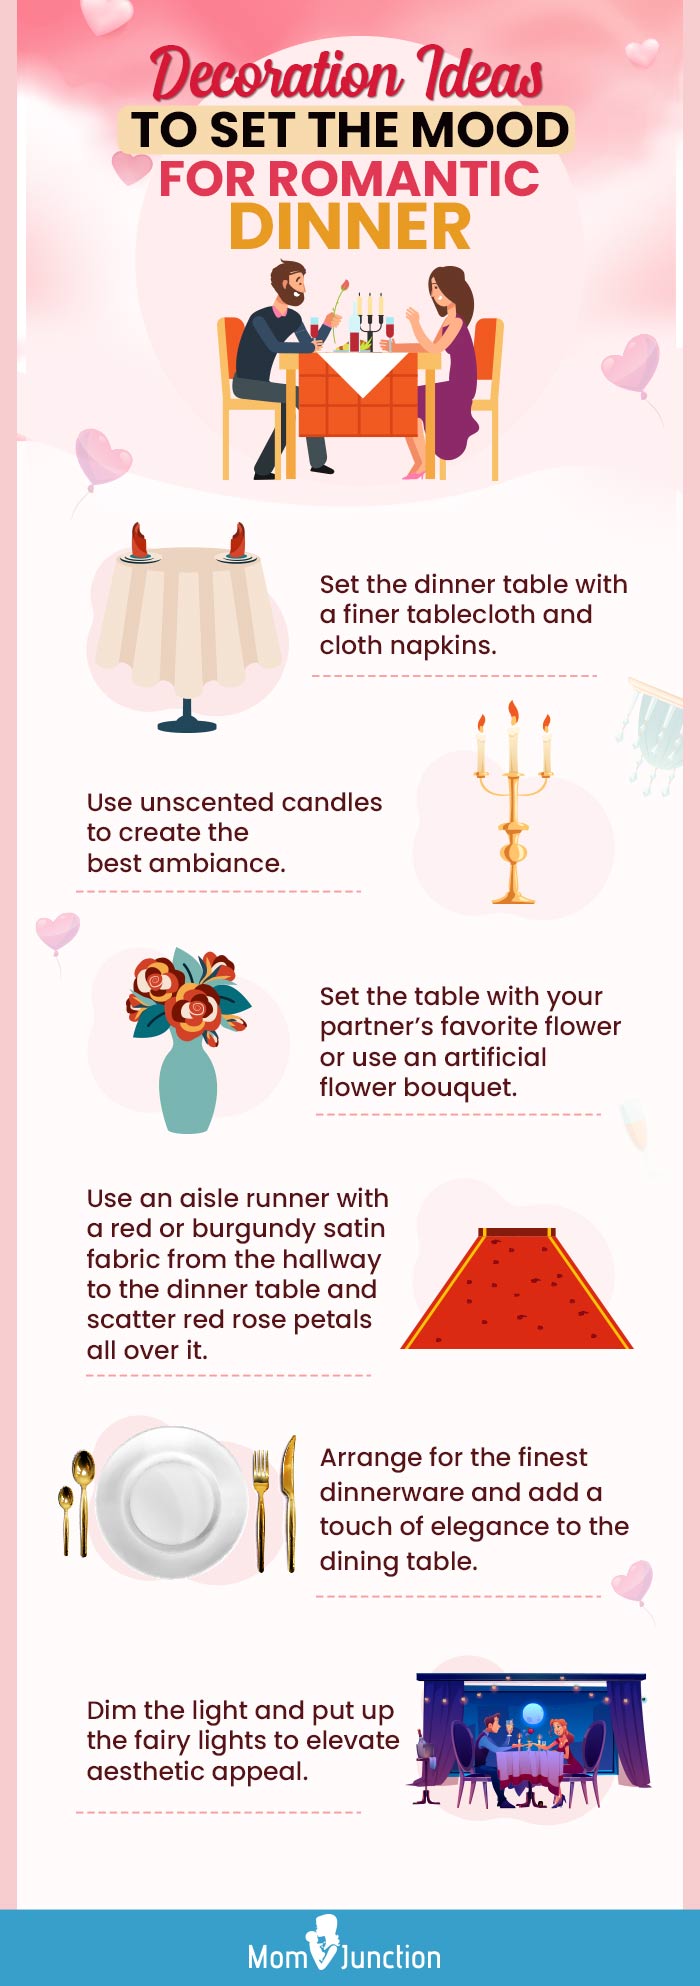 decoration ideas to set the mood for a romantic dinner (infographic)